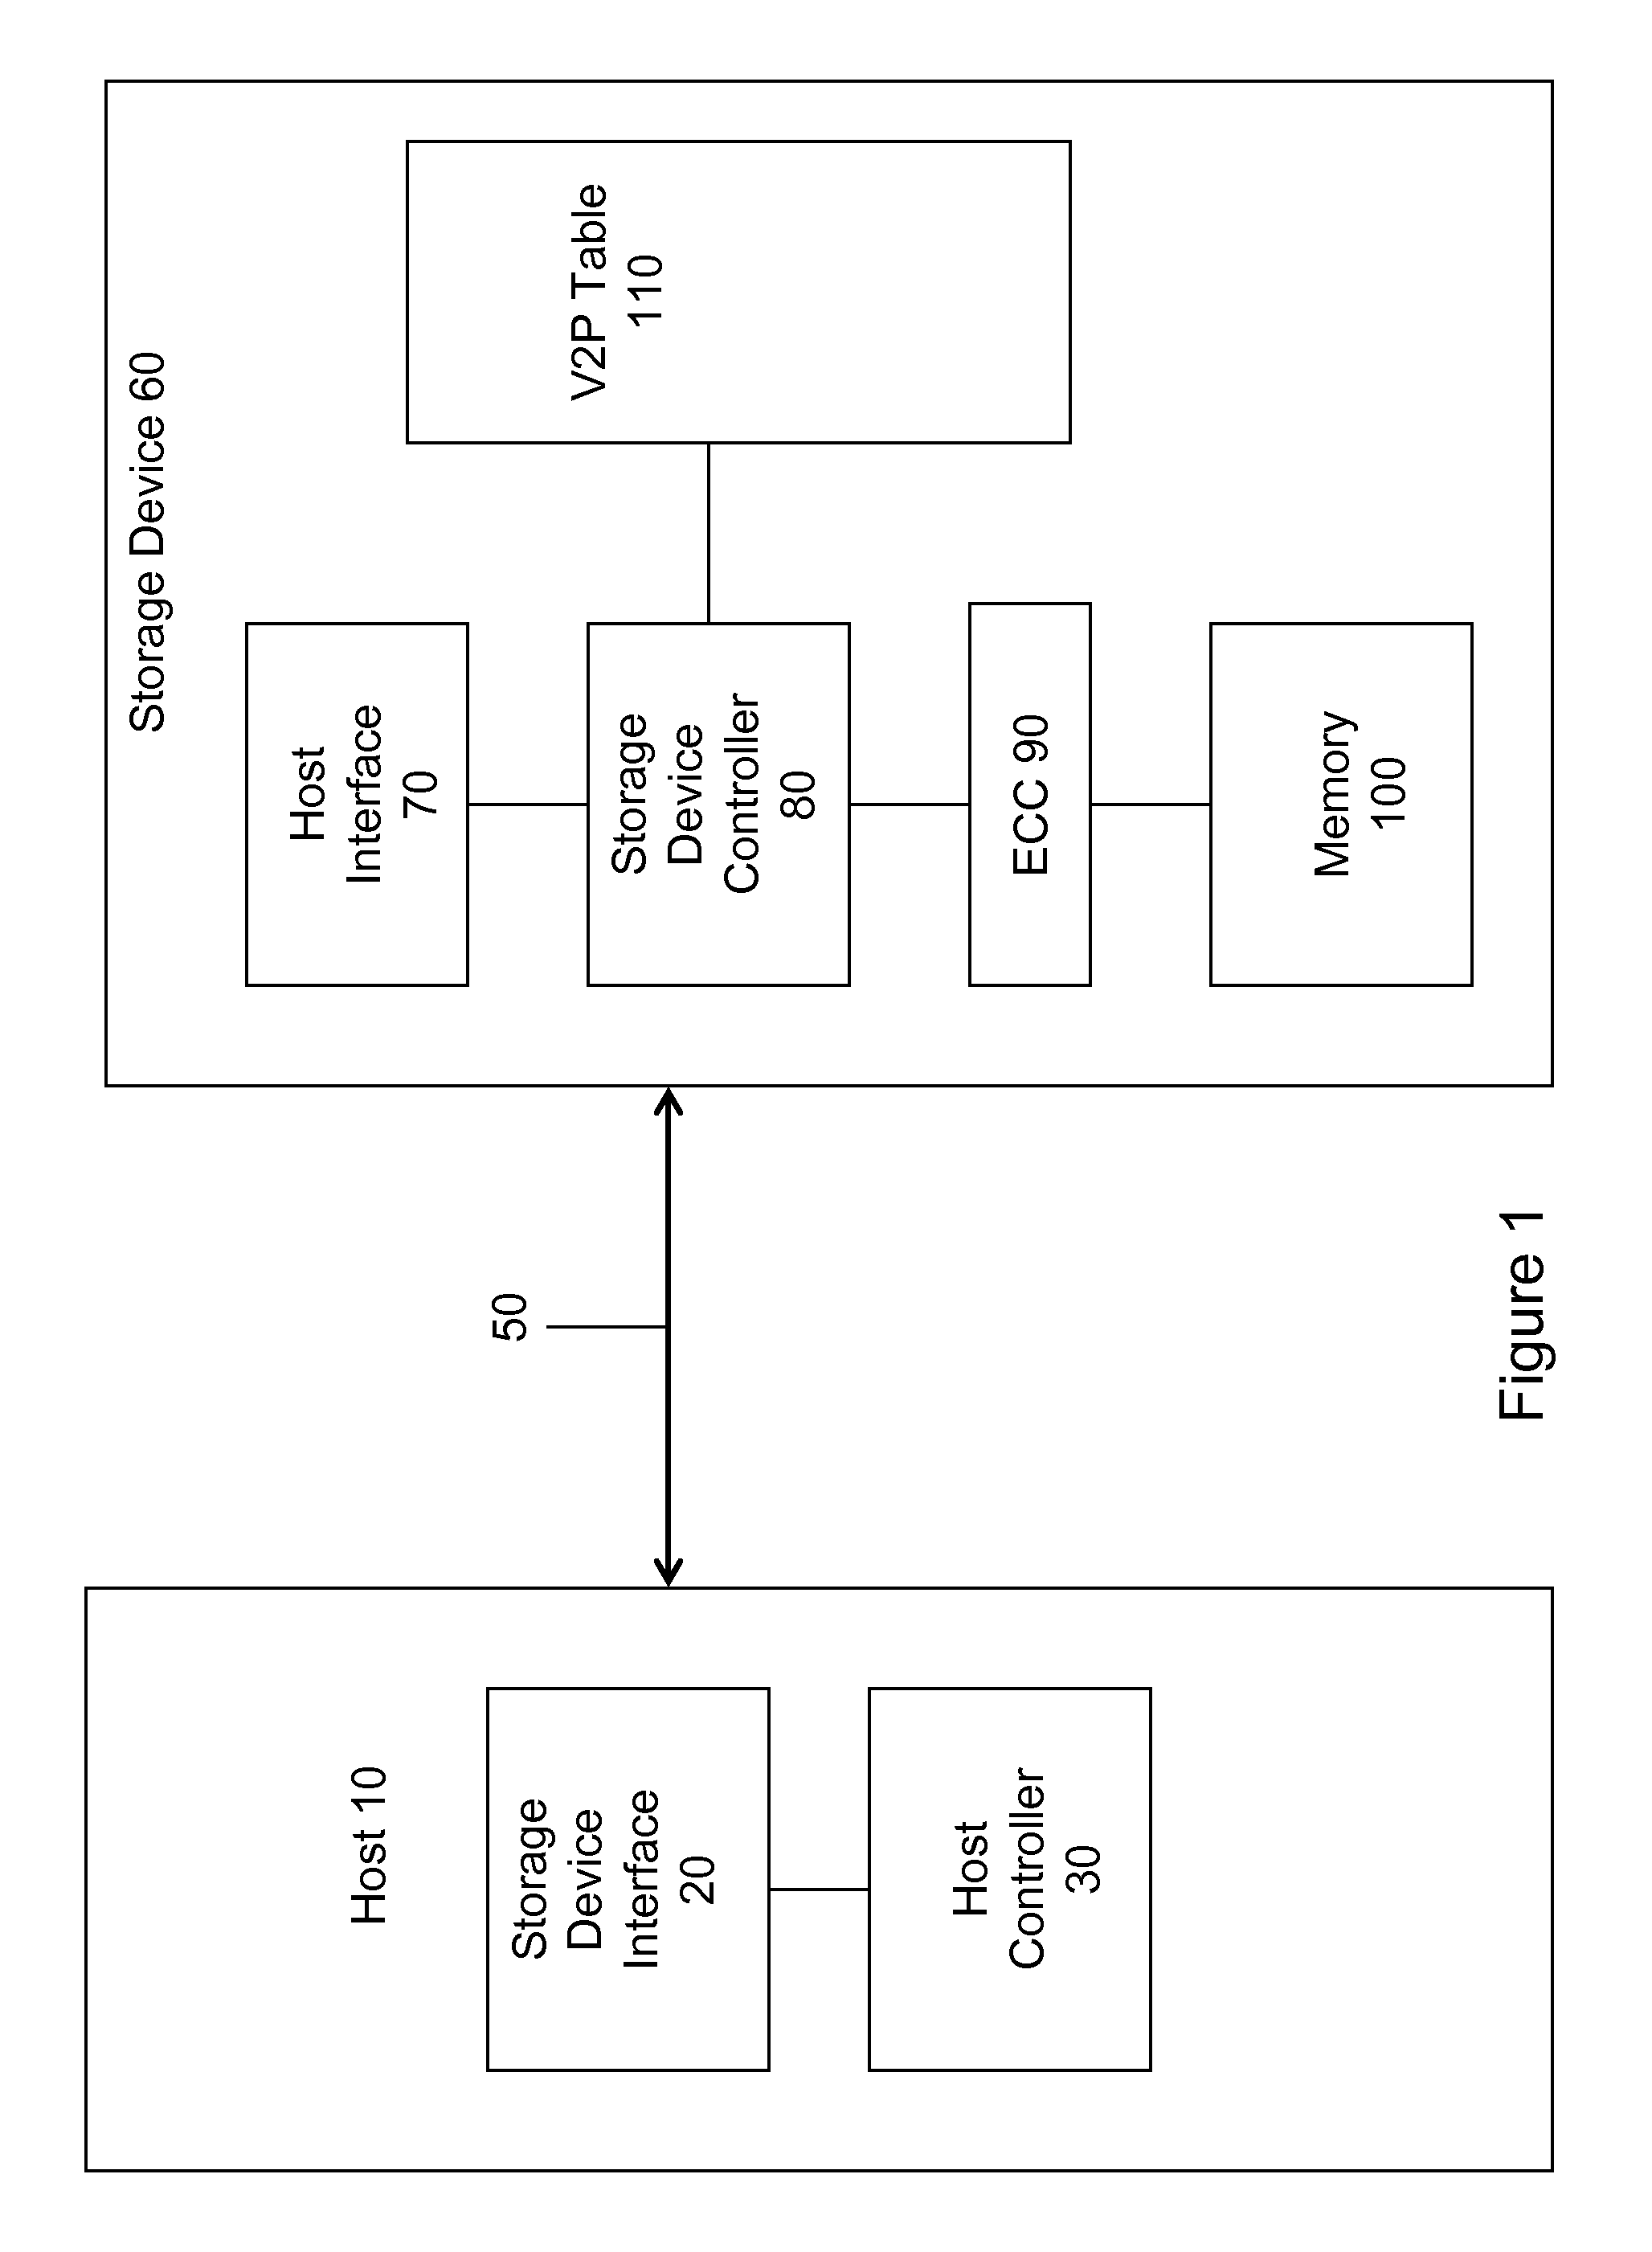 Methods for optimizing data movement in solid state devices